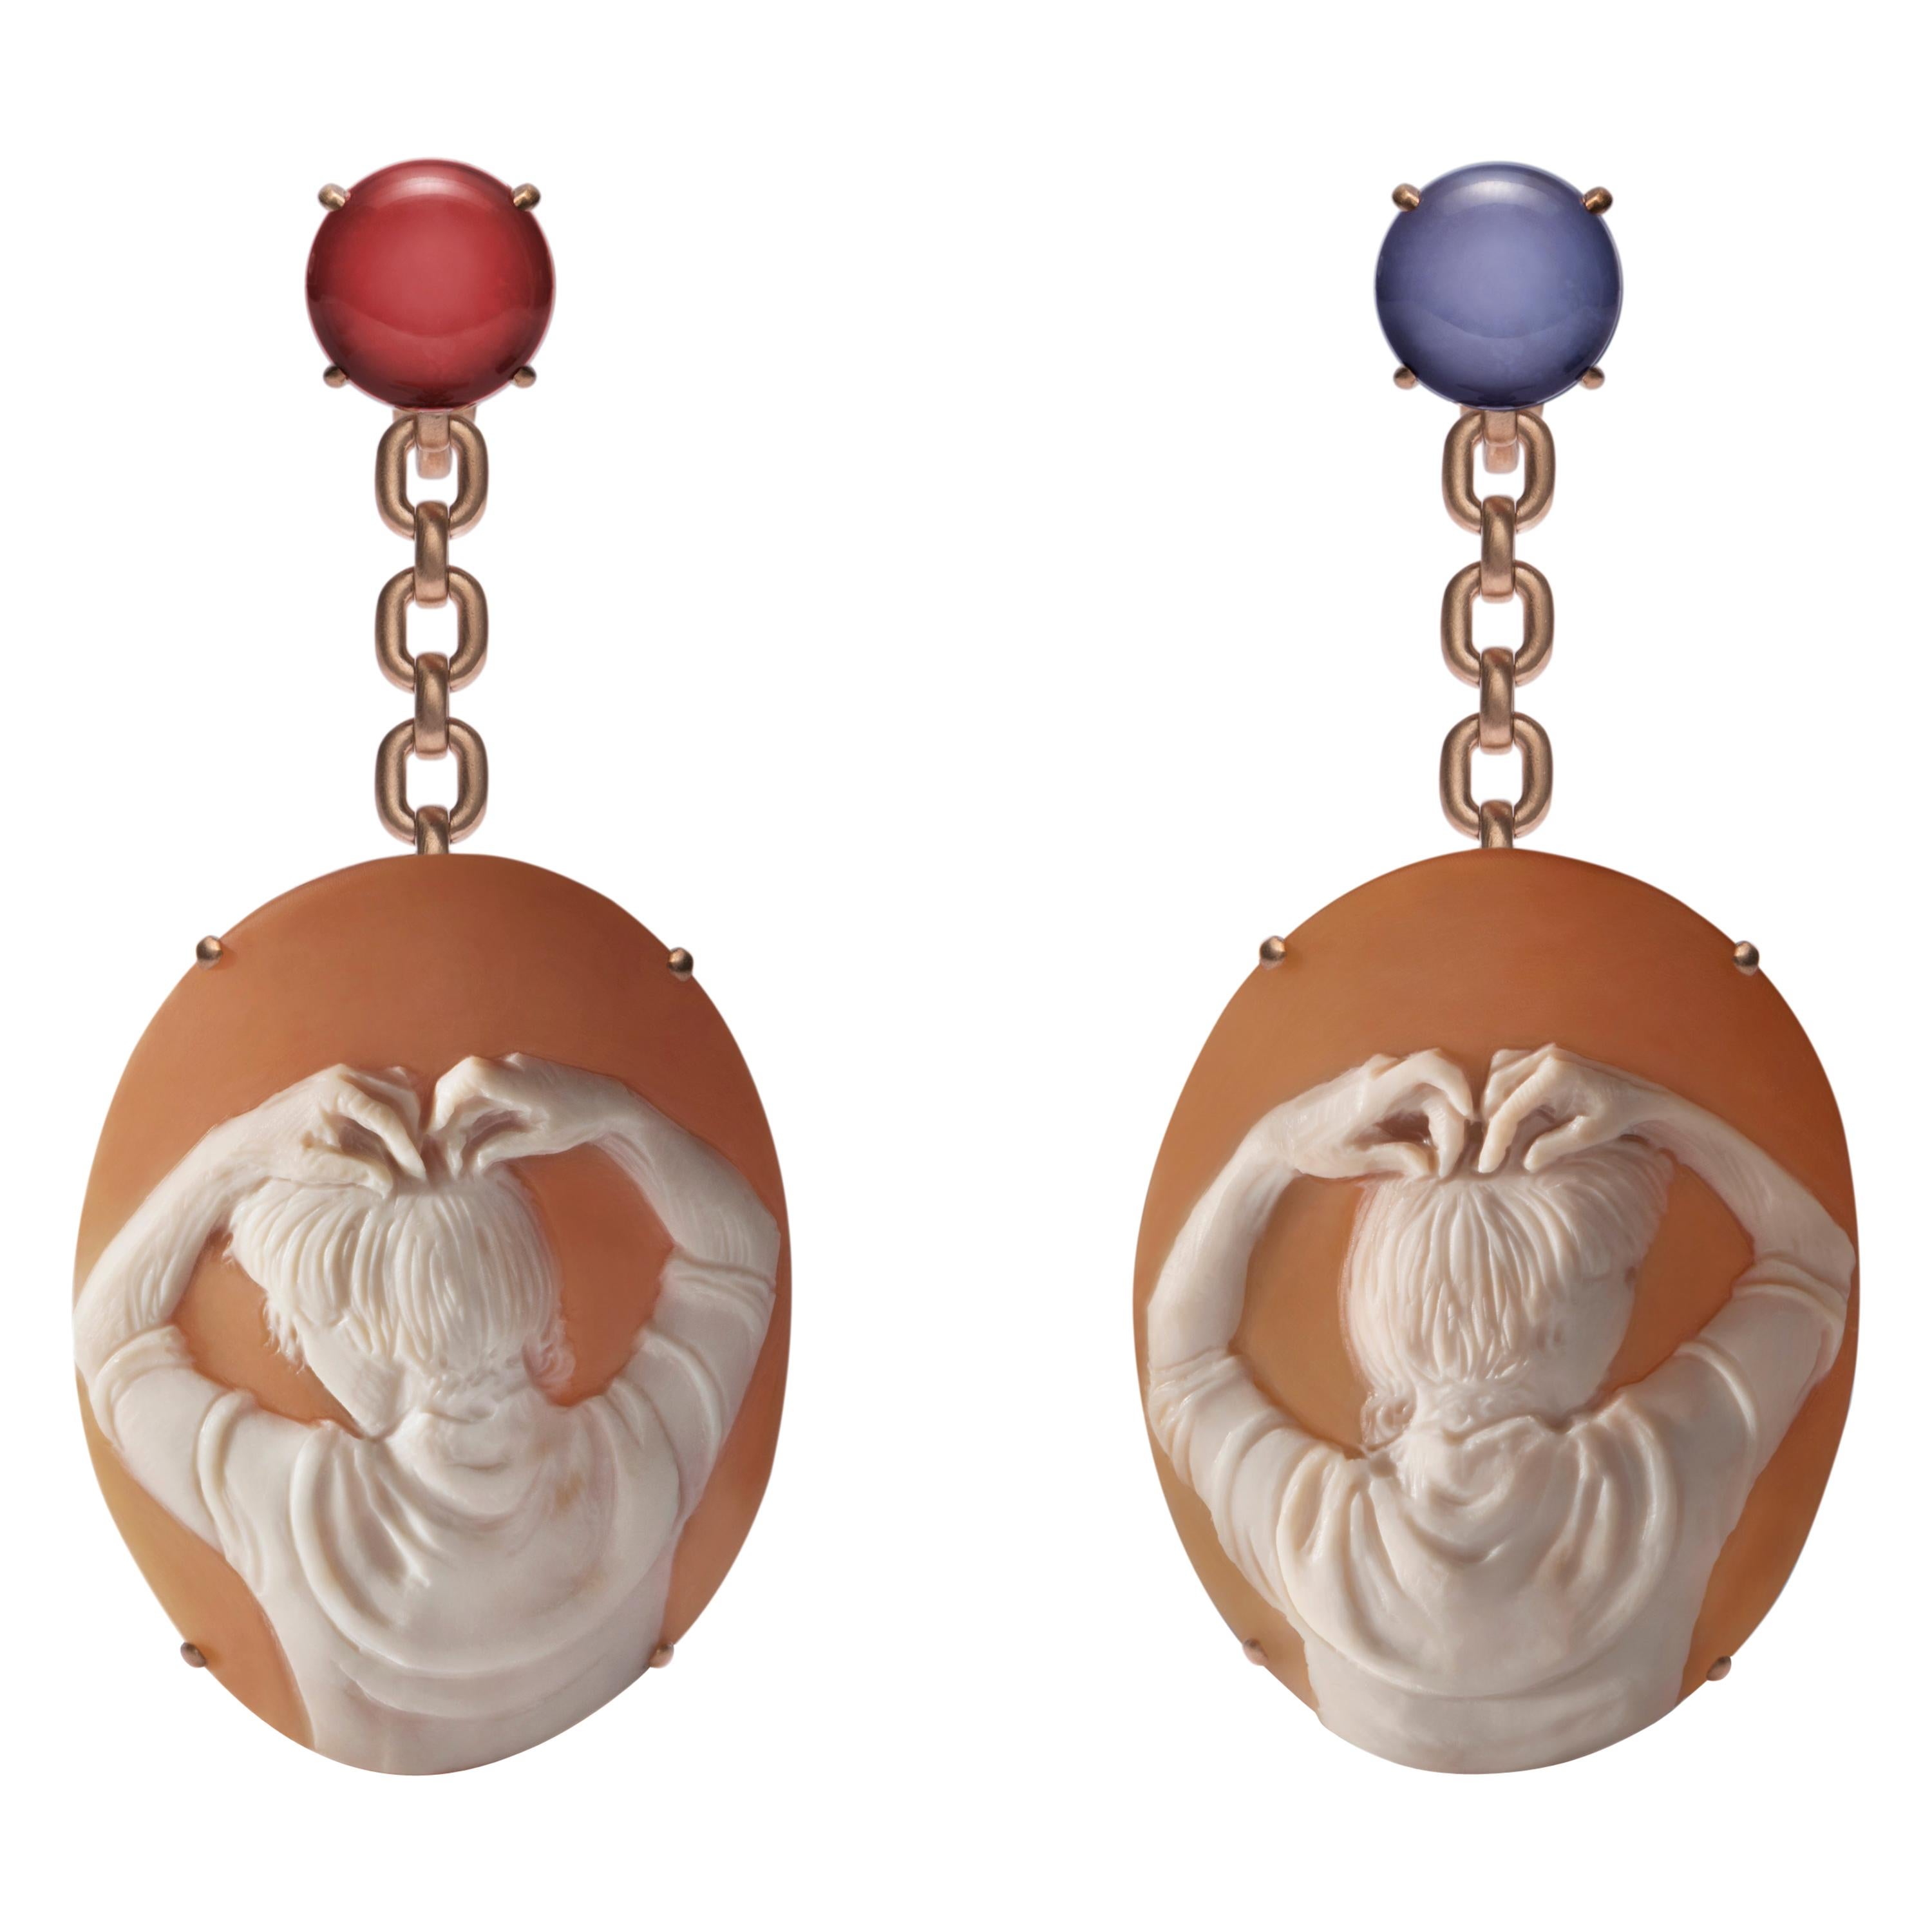 Mary Cameo Earrings in 18K Gold, Blue Chalcedony and Carnelian by Catherine Opie For Sale